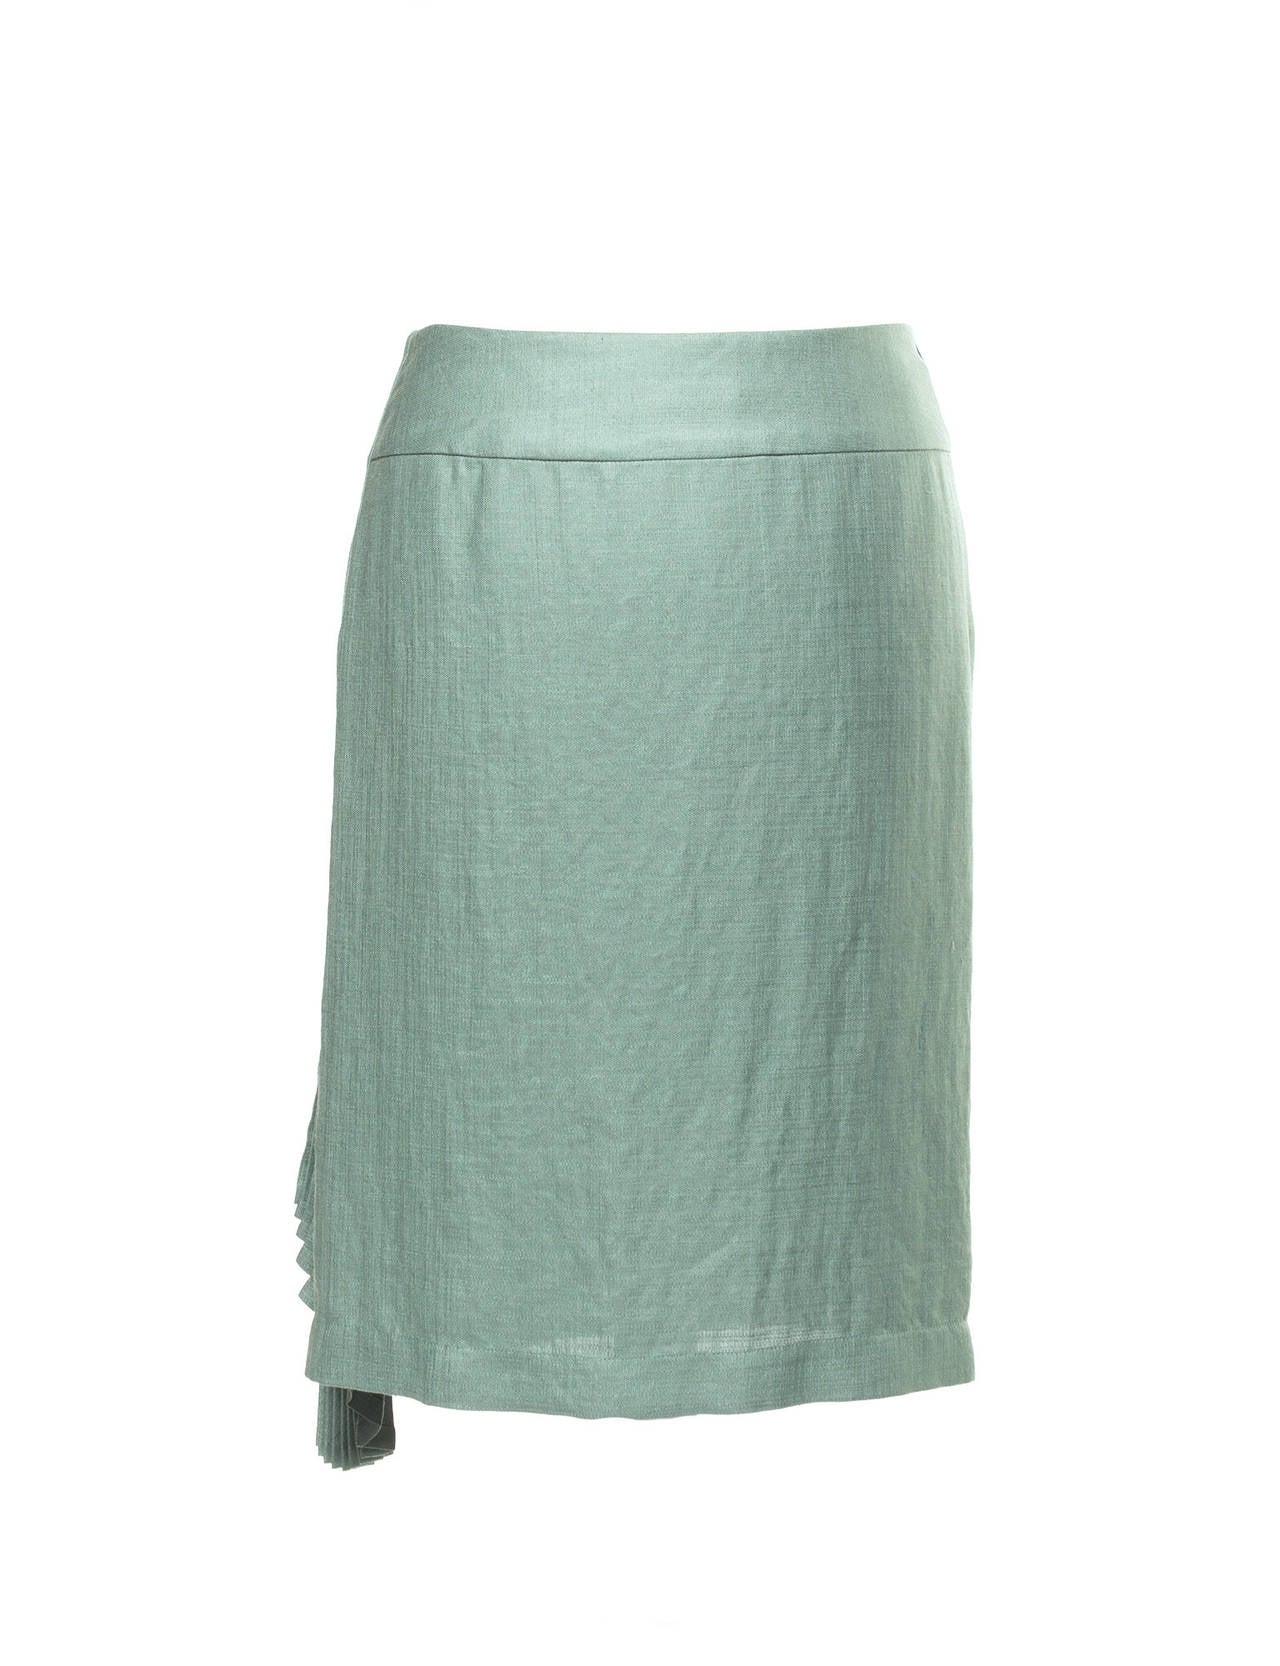 Women's Vintage 90's Issey Miyake Celadon Green Skirt with pleated front detail, Sz. 8